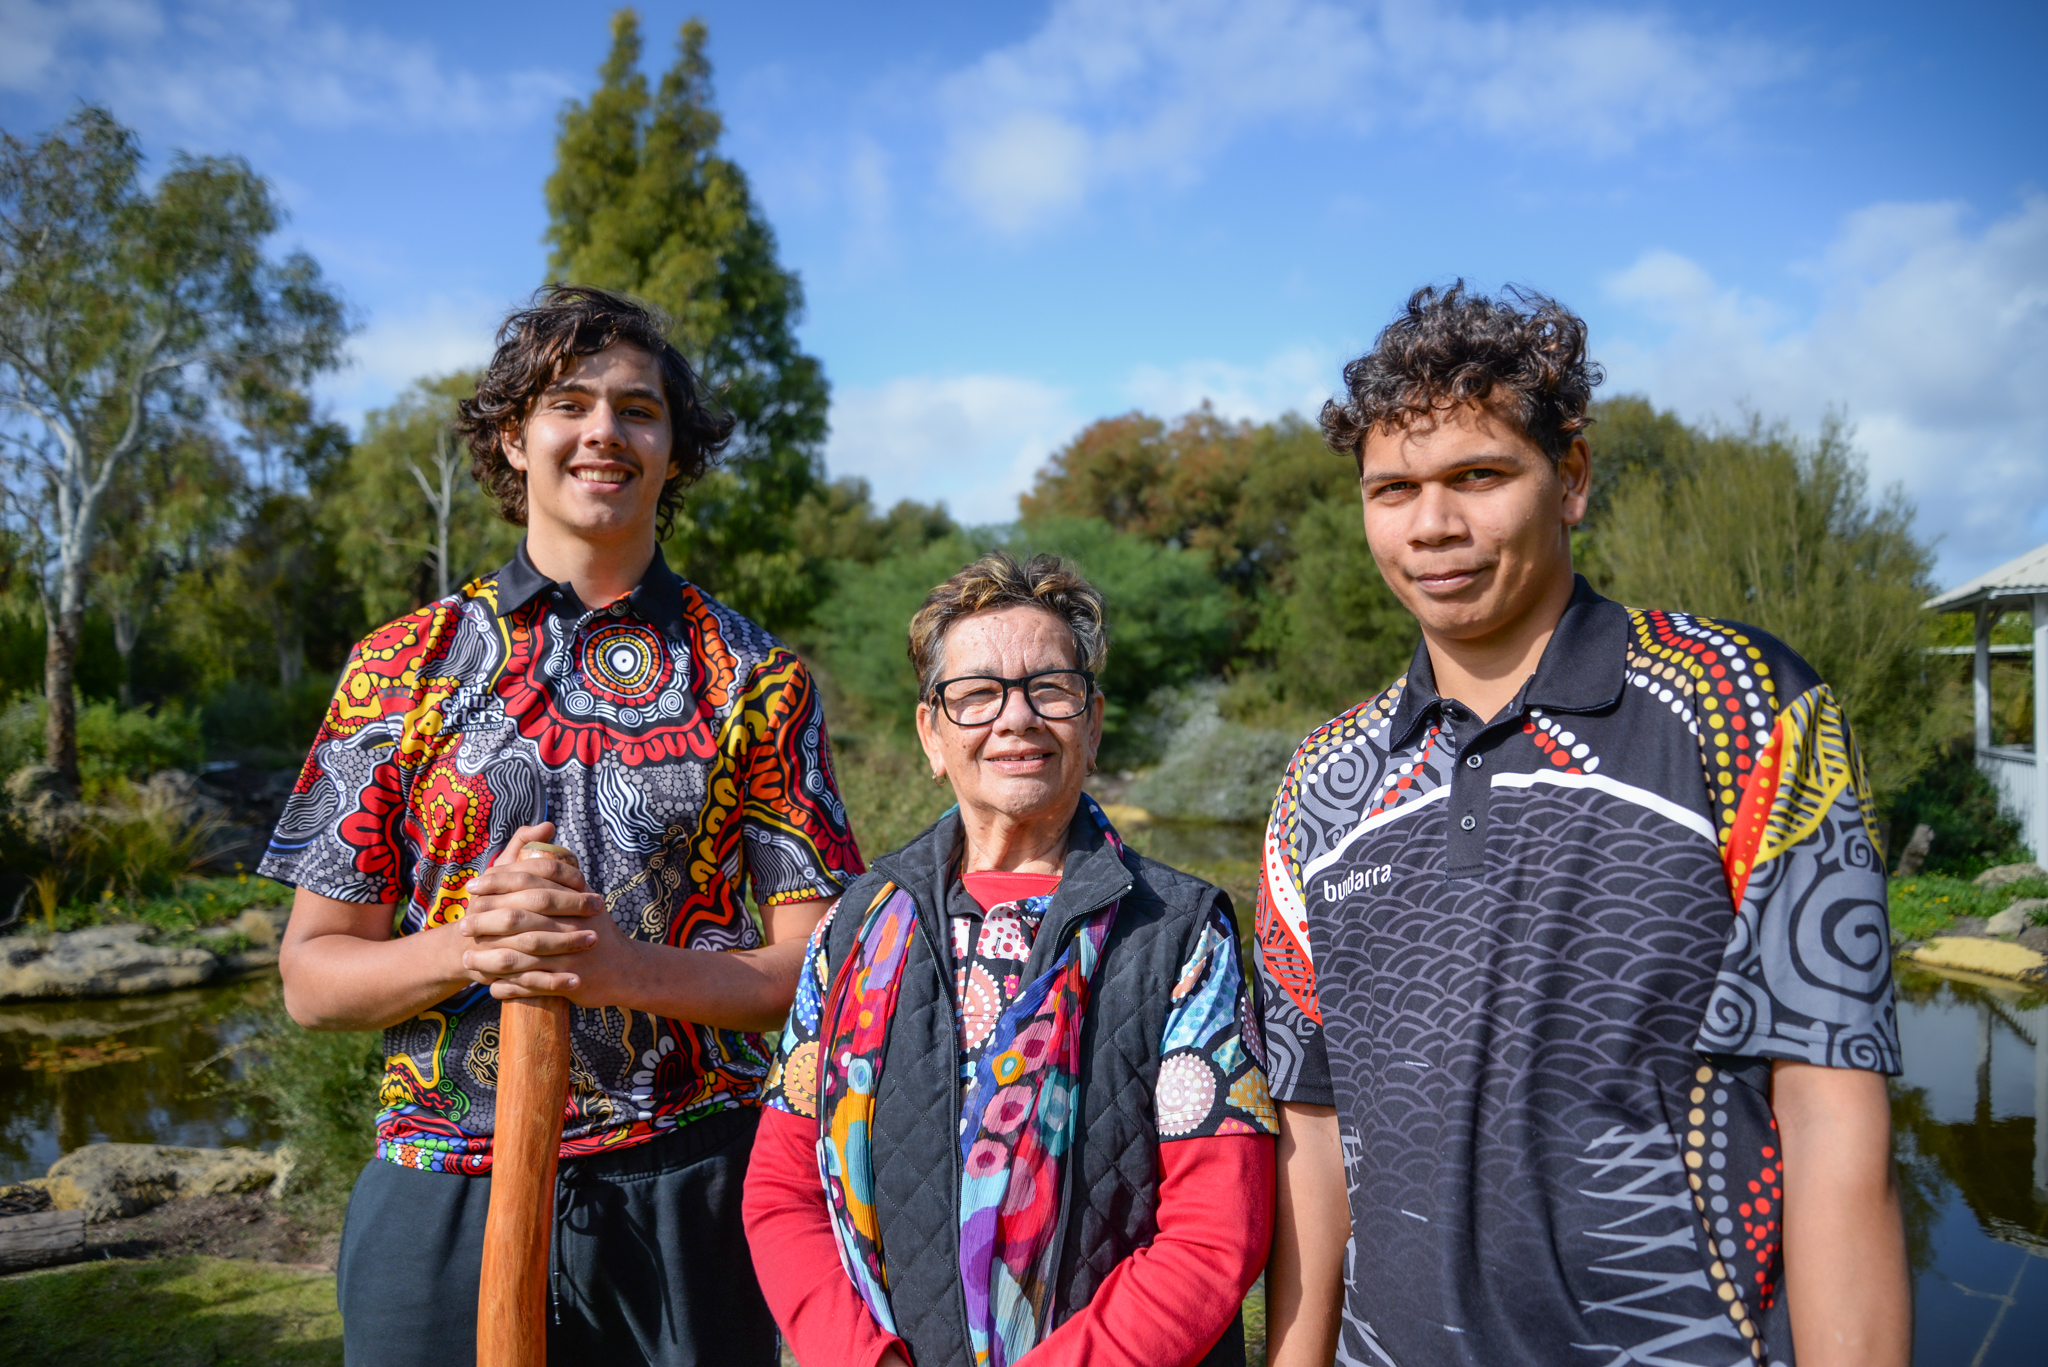 Robyn Collard (centre) with grandsons Tryse and Albert on either side. They are standing in the Rocky Bay garden.